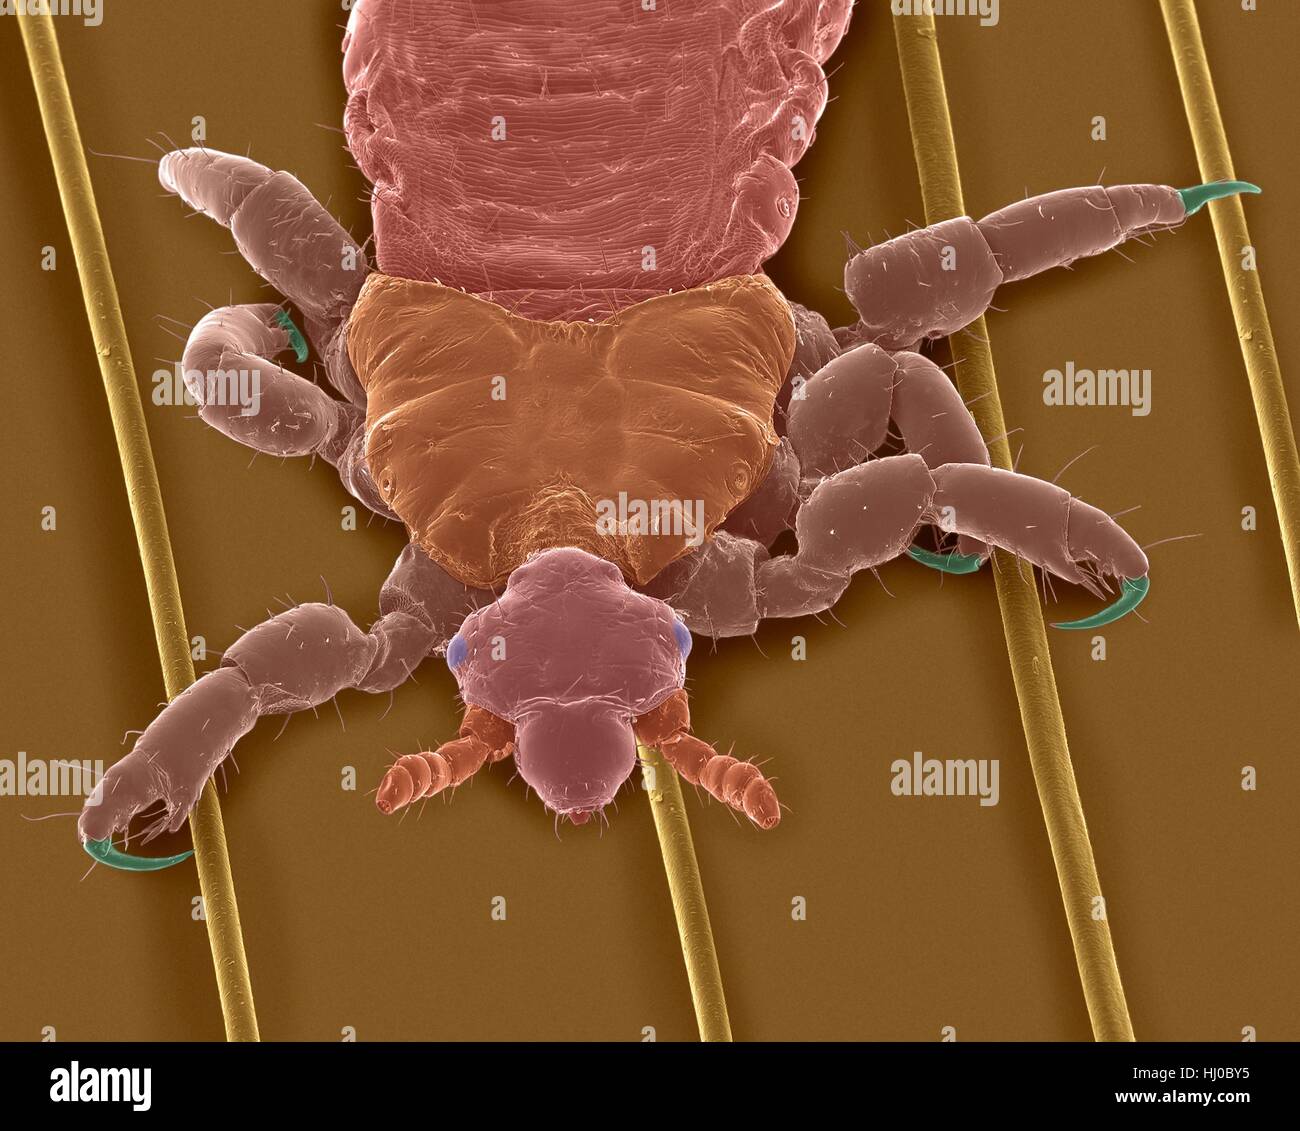 Coloured scanning electron micrograph (SEM) of Human head louse on human hair (Pediculus humanus capitis).The head louse (Pediculus humanus capitis) is insect in Order Psocodea (parasitic lice,formerly Order Phthiraptera/Pscocptera).Head lice are ectoparasites humans as only host.A head louse must Stock Photo